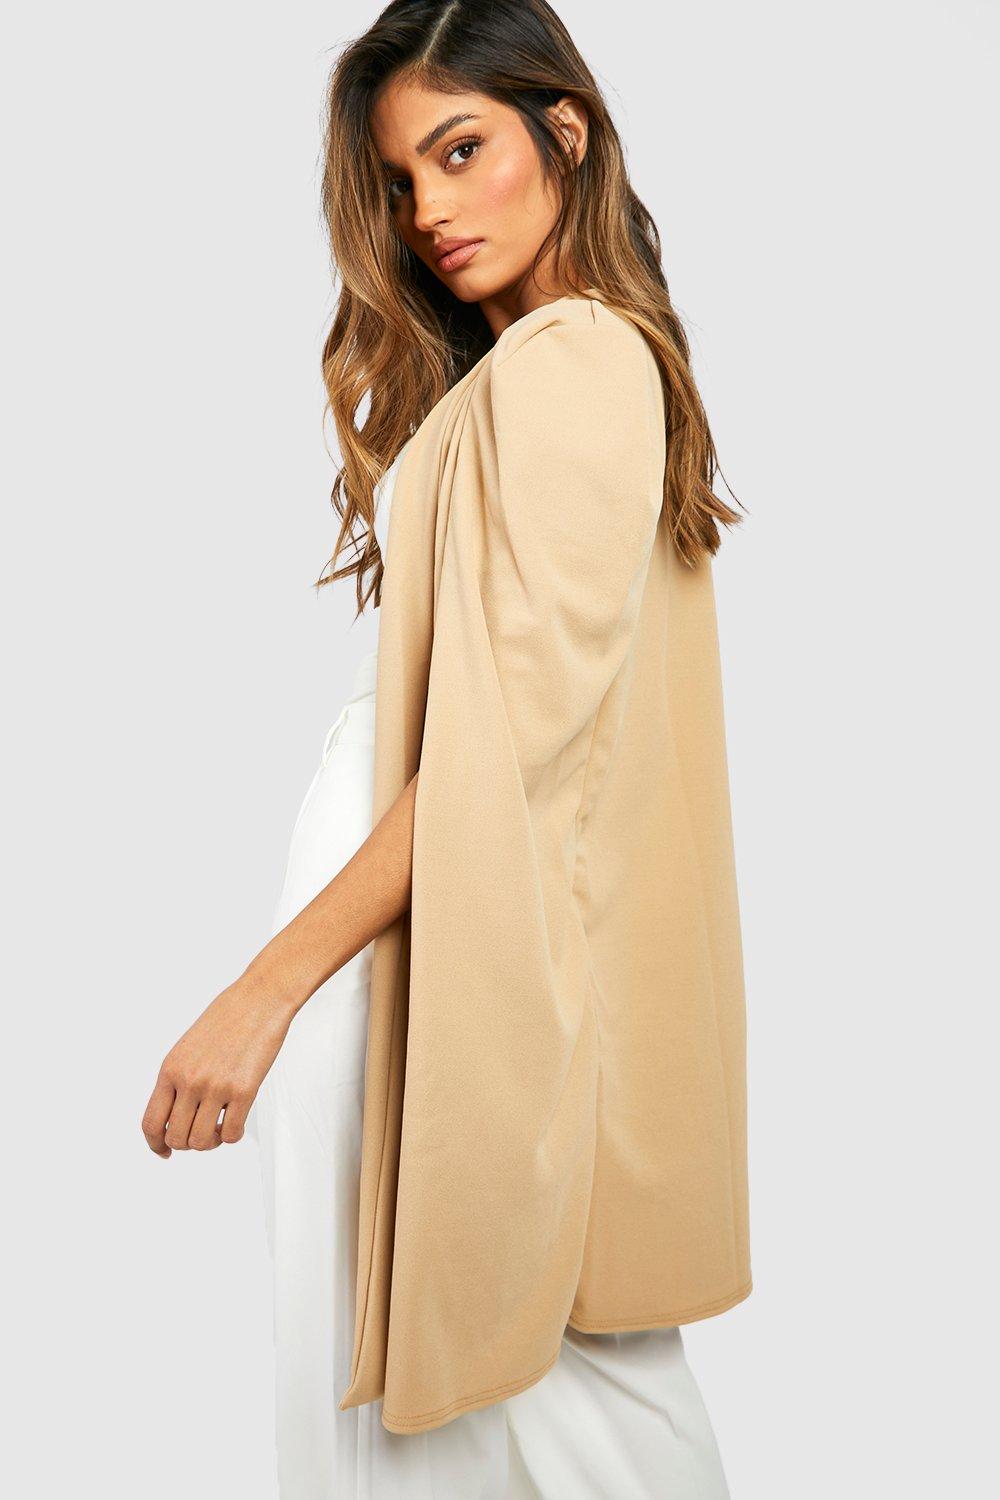 4 Boohoo Women Clothing Jackets Ponchos & Capes Womens Longline Tailored Crepe Cape 